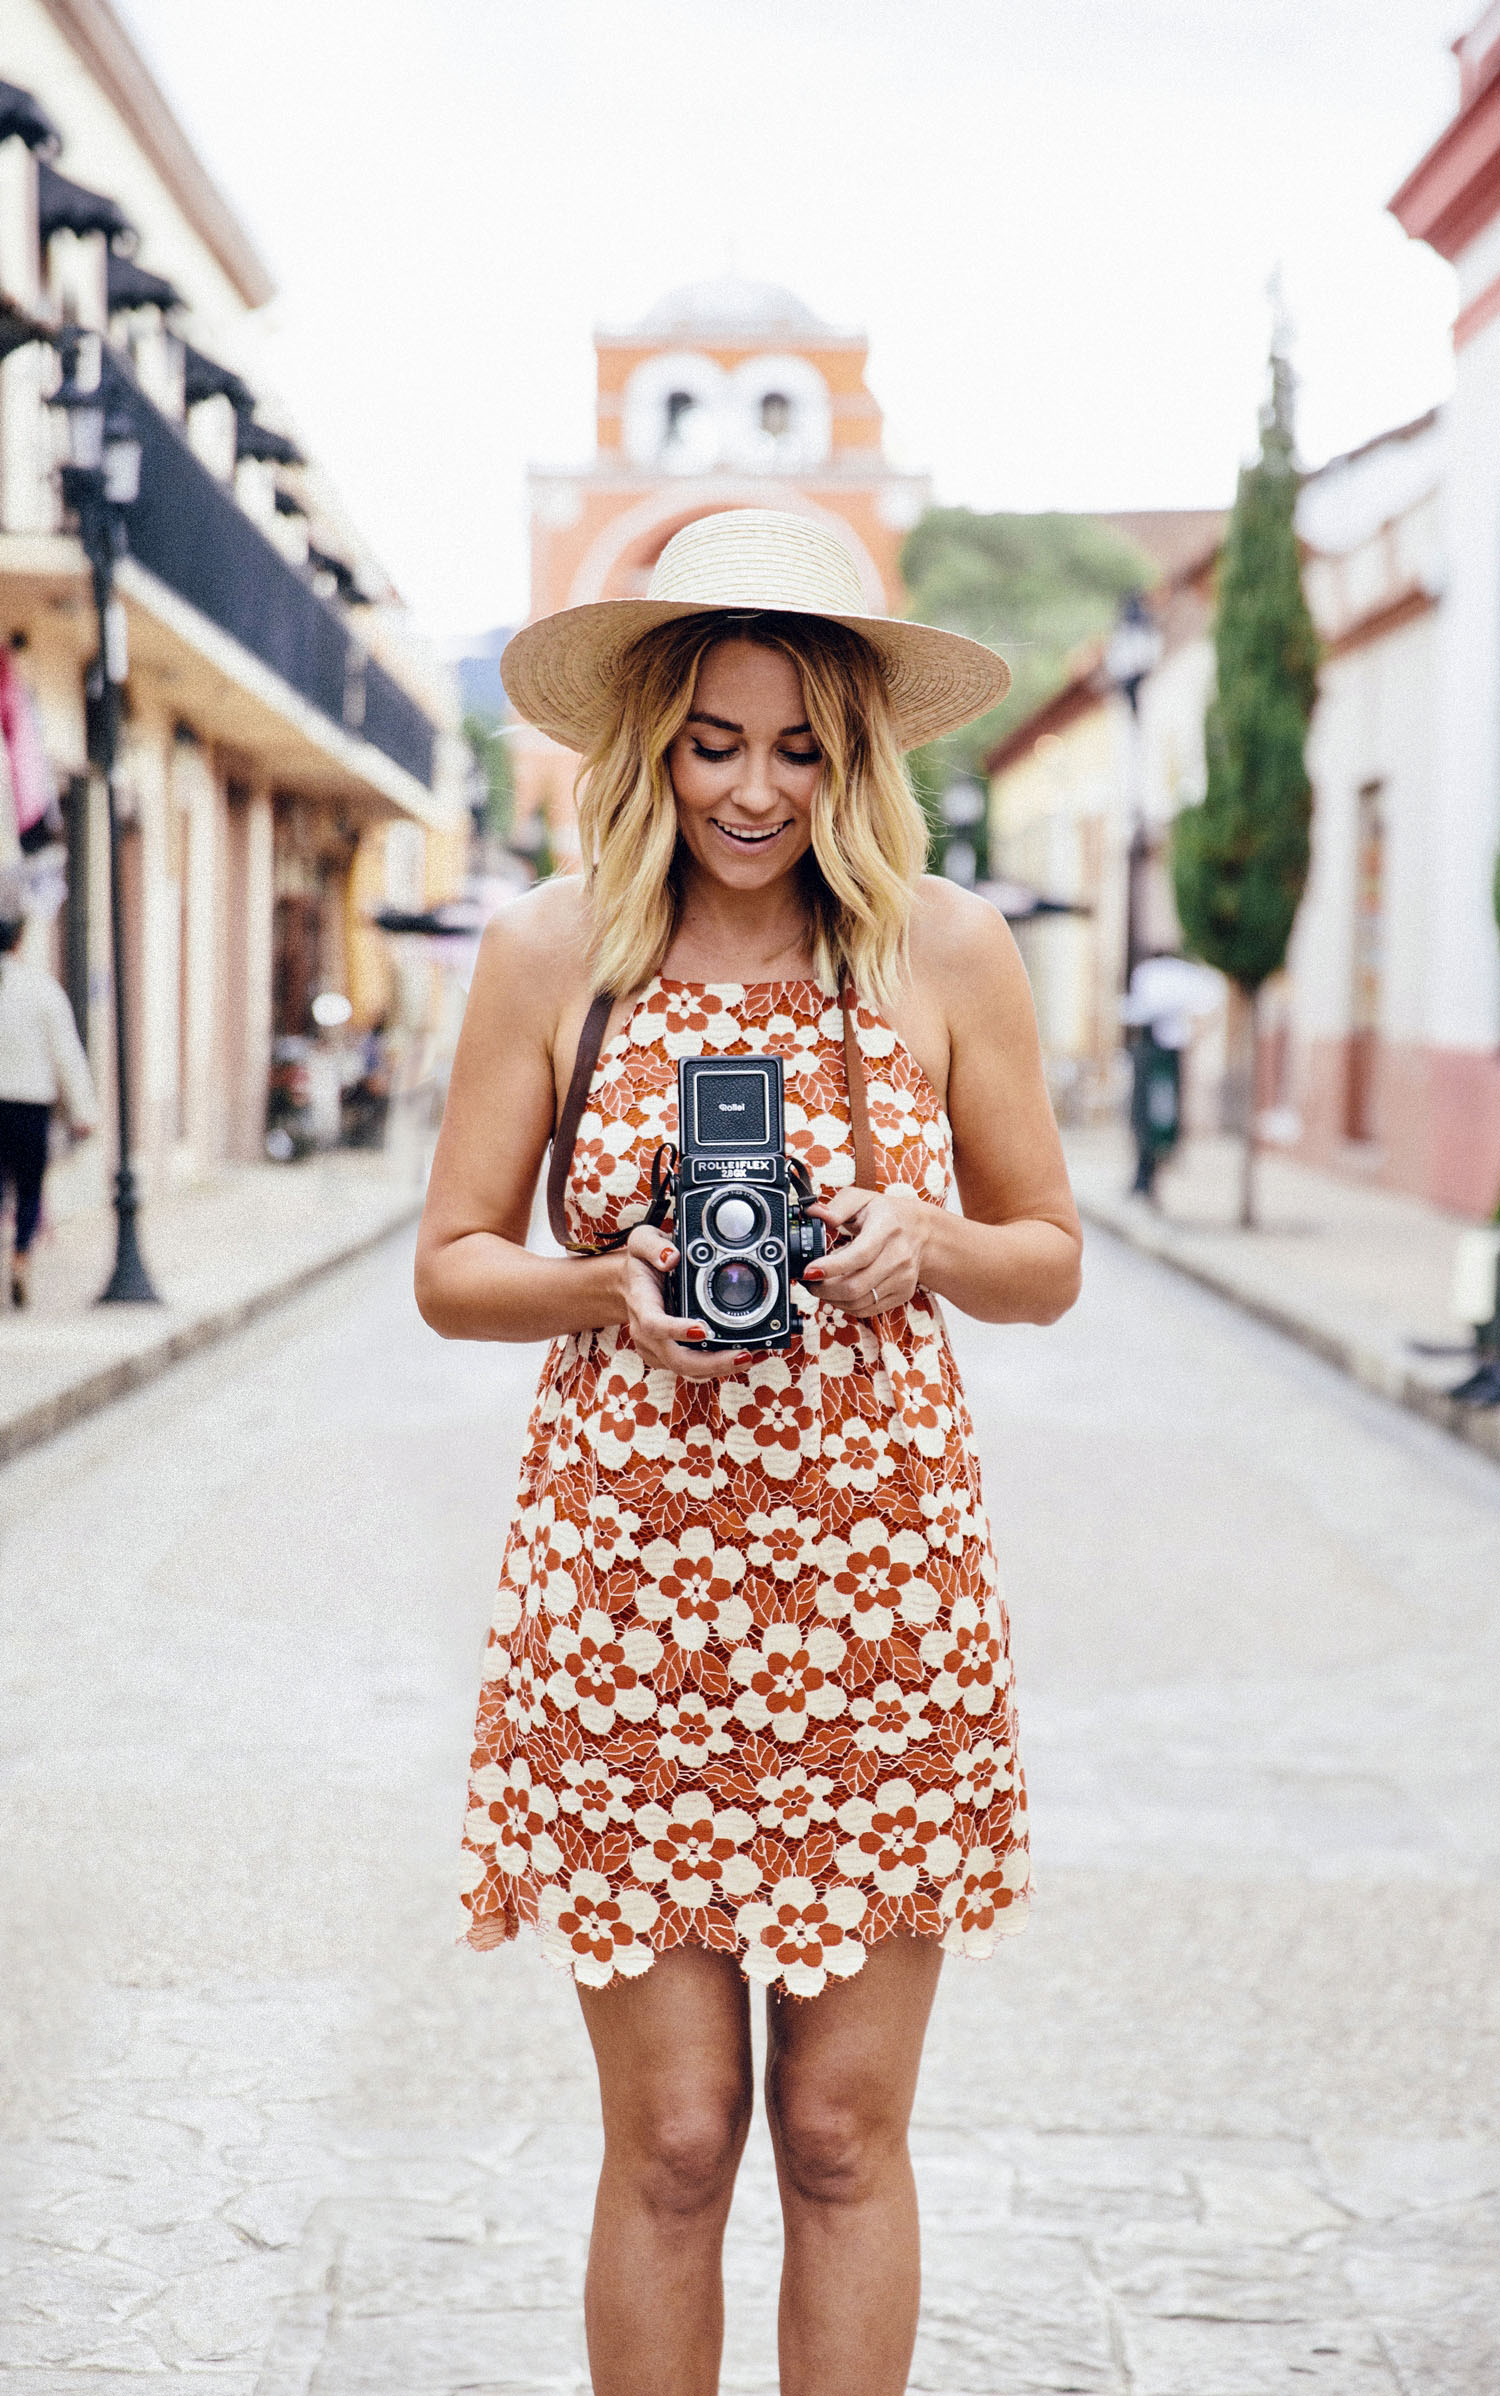 LC by Lauren Conrad Street Style Fashion by Top Bloggers